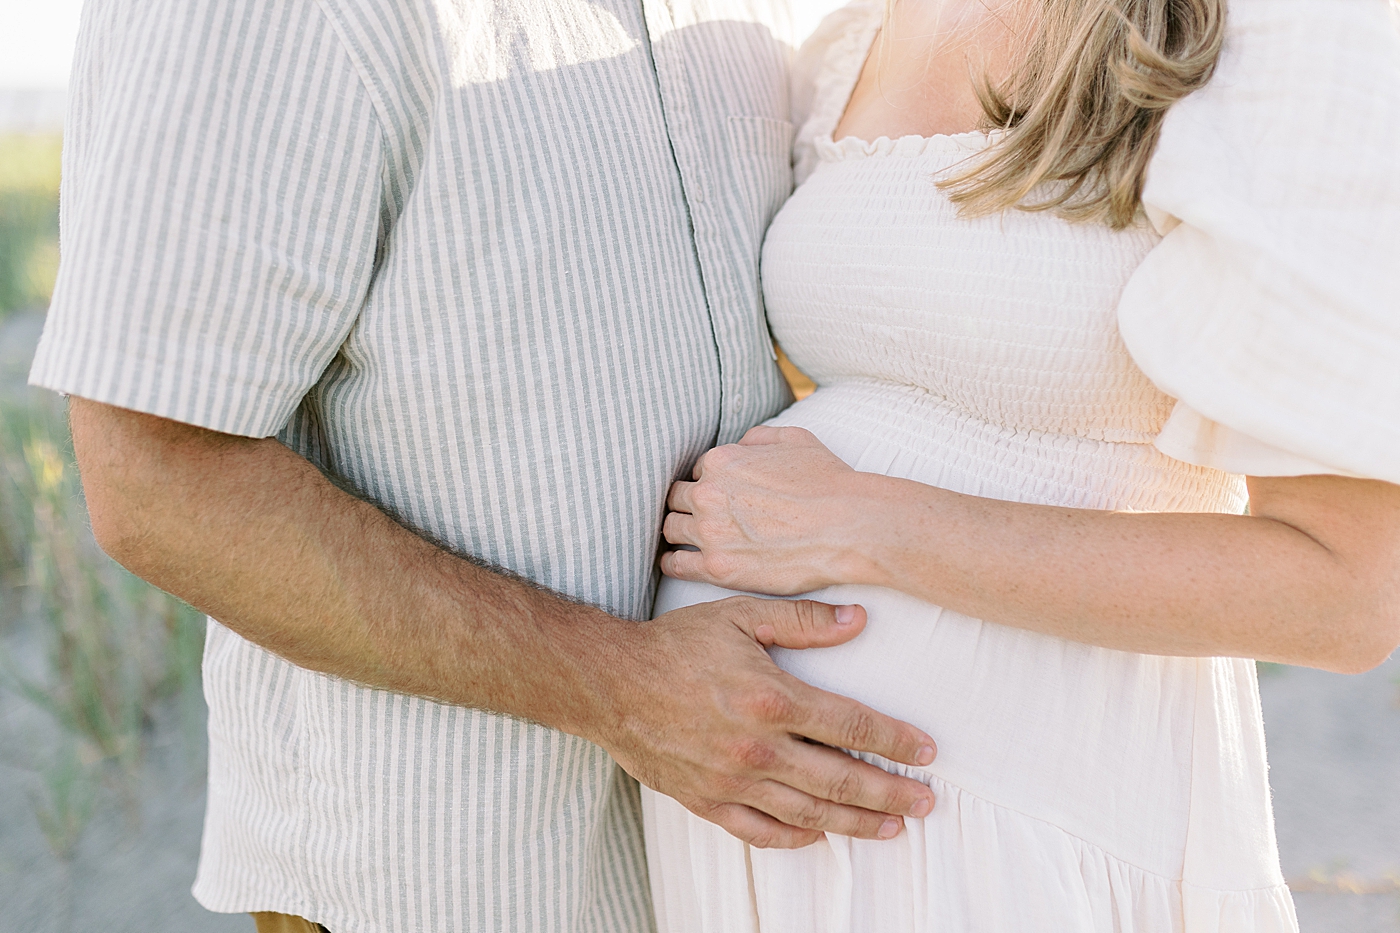 Detail of mom and dad's hands on mom's pregnant belly | Image by Caitlyn Motycka